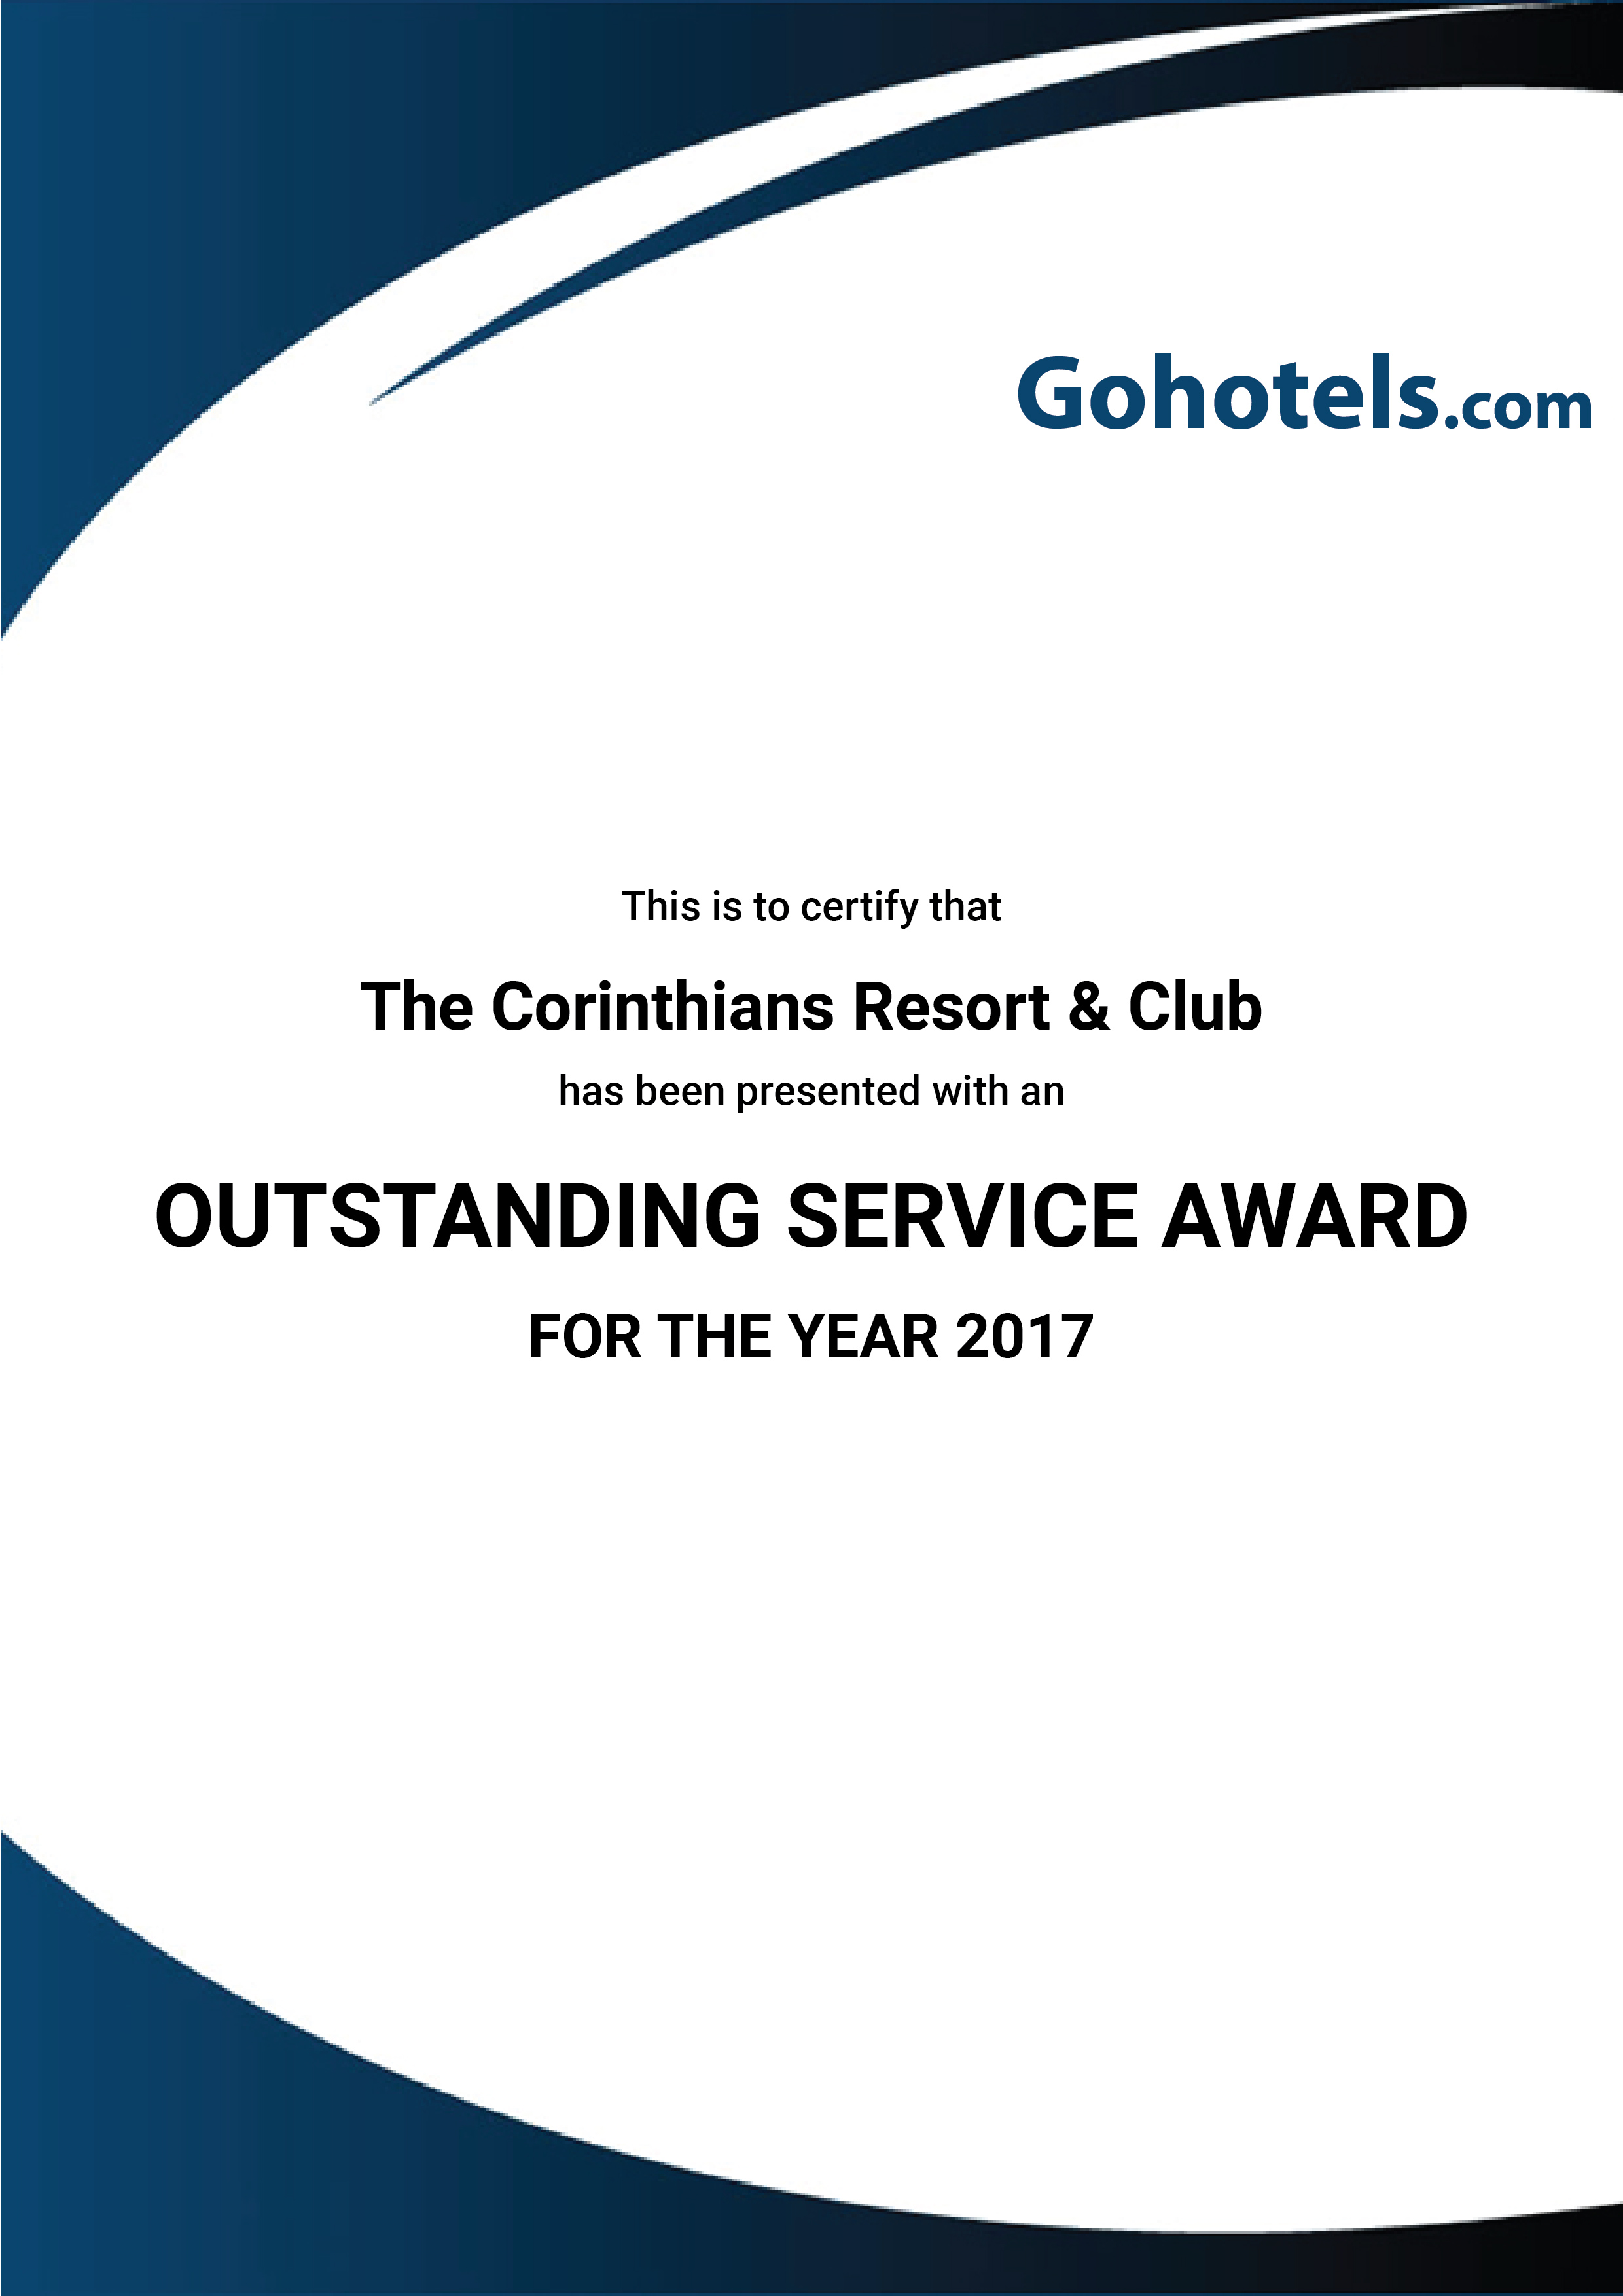 HotelsCombined - Recognition of Excellence - 2018